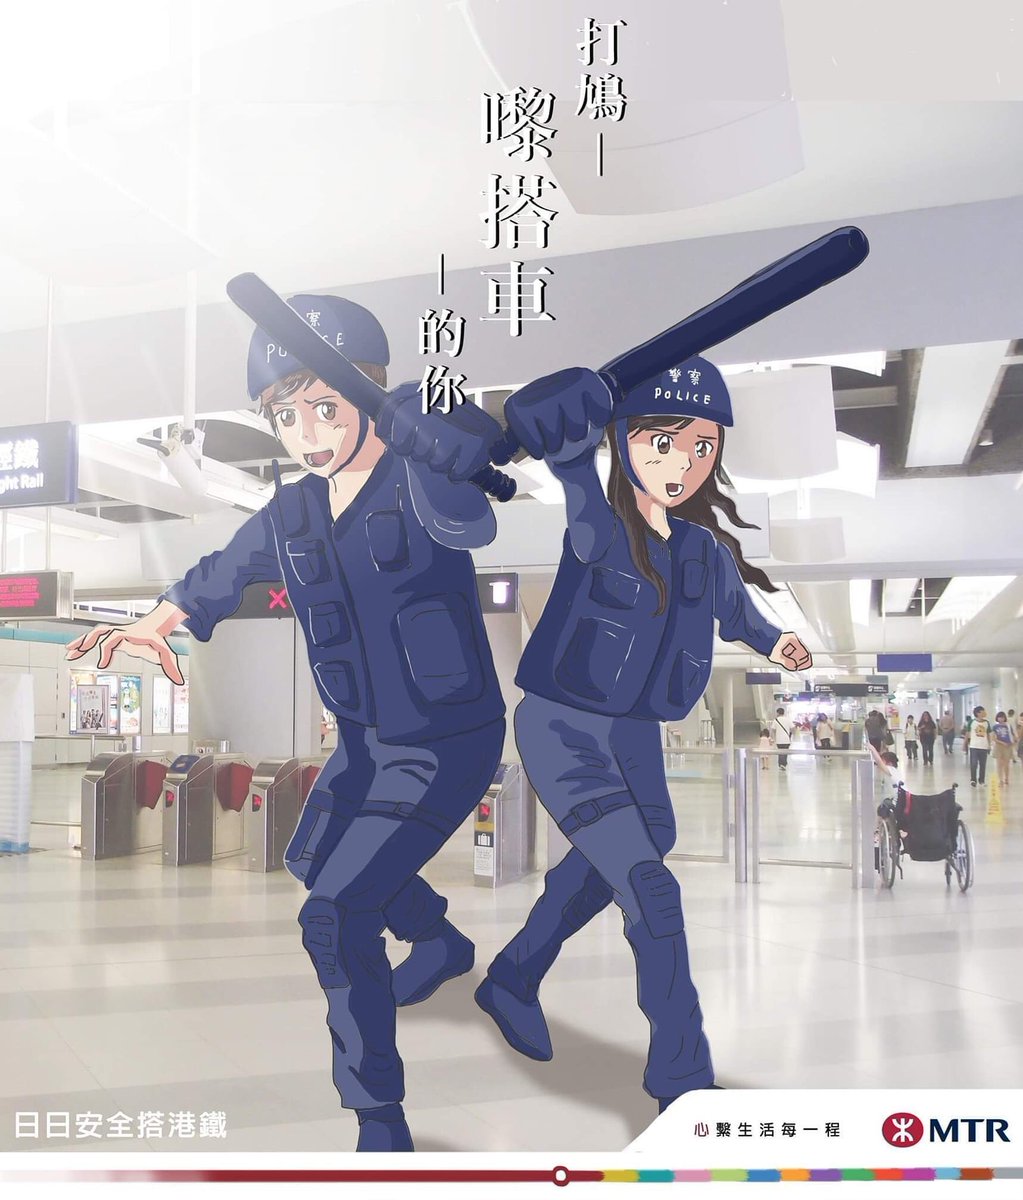 Artwork satirizing MTR posters with images of police officers in response to the August 31, 2019 Prince Edward attack